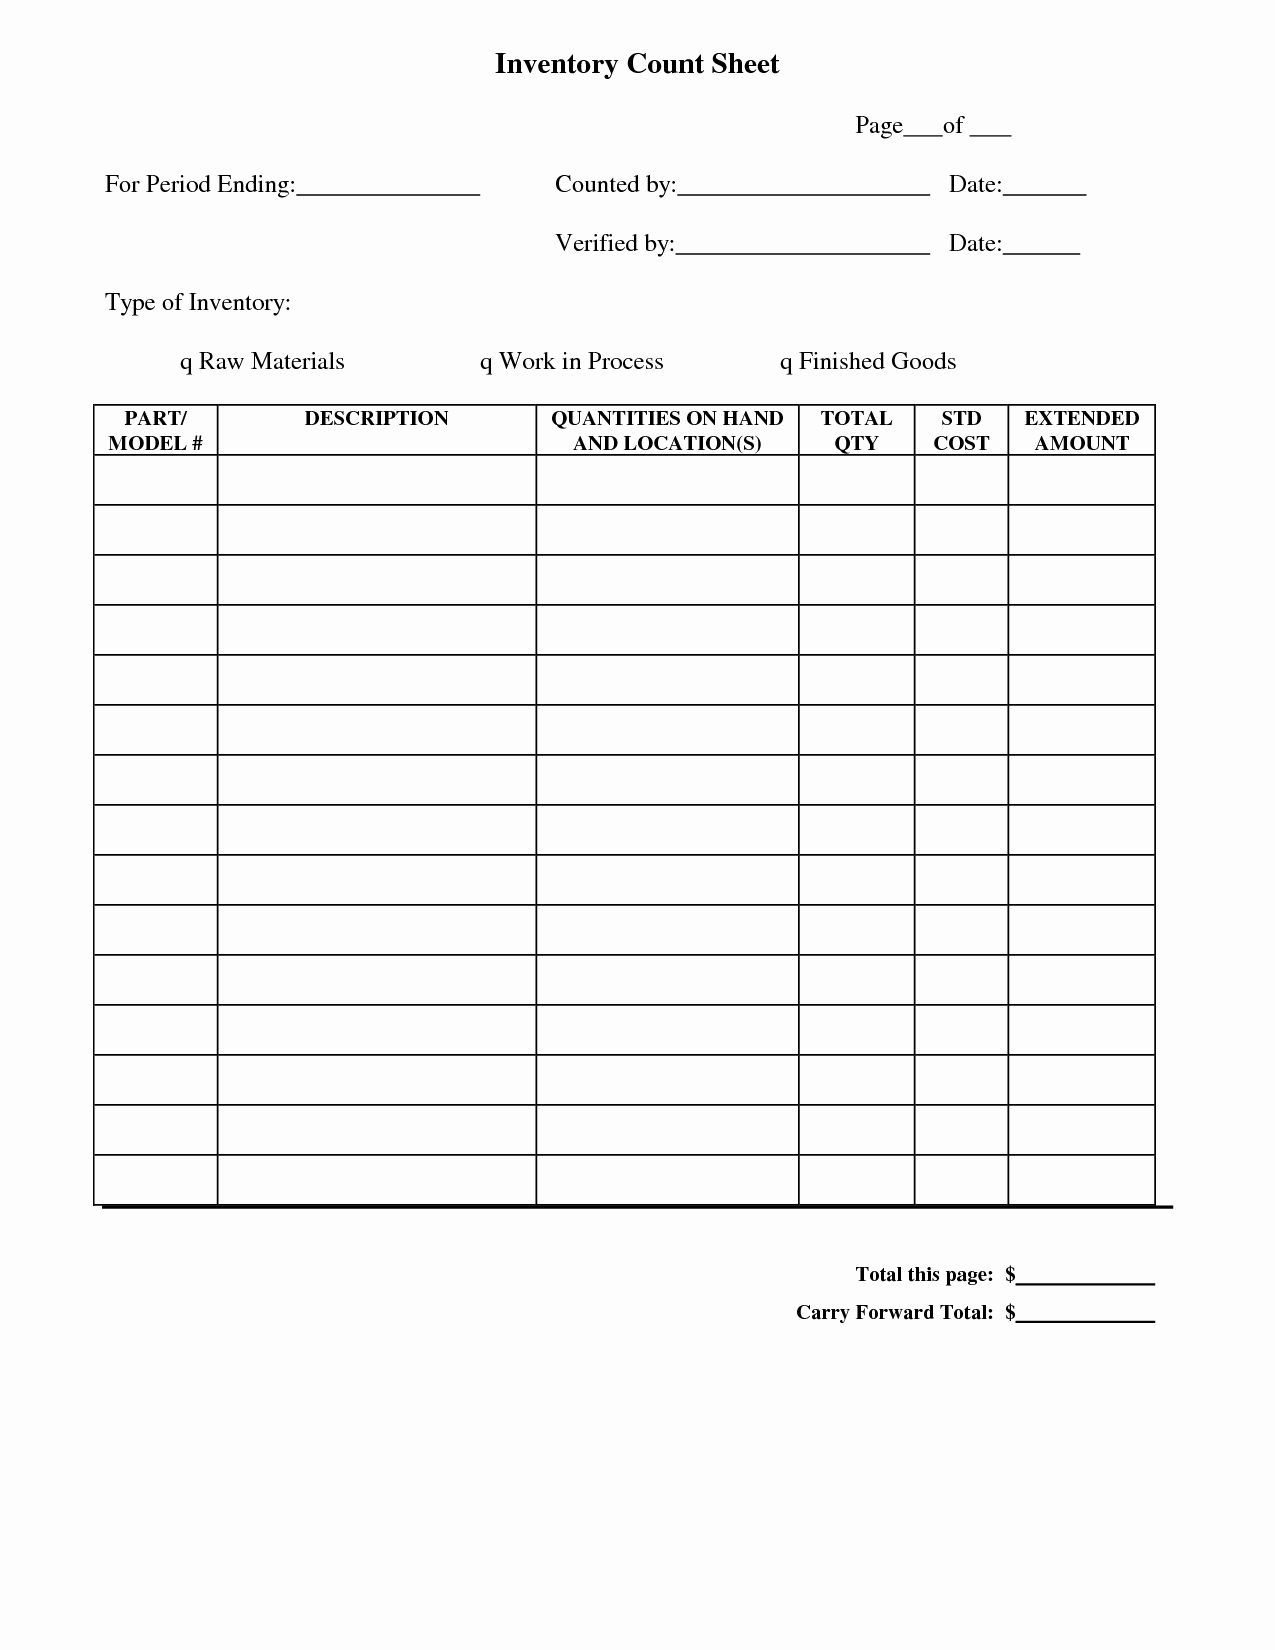 Physical Inventory Count Sheet Template Fresh Best S Of Sample Inventory Spreadsheet Sample